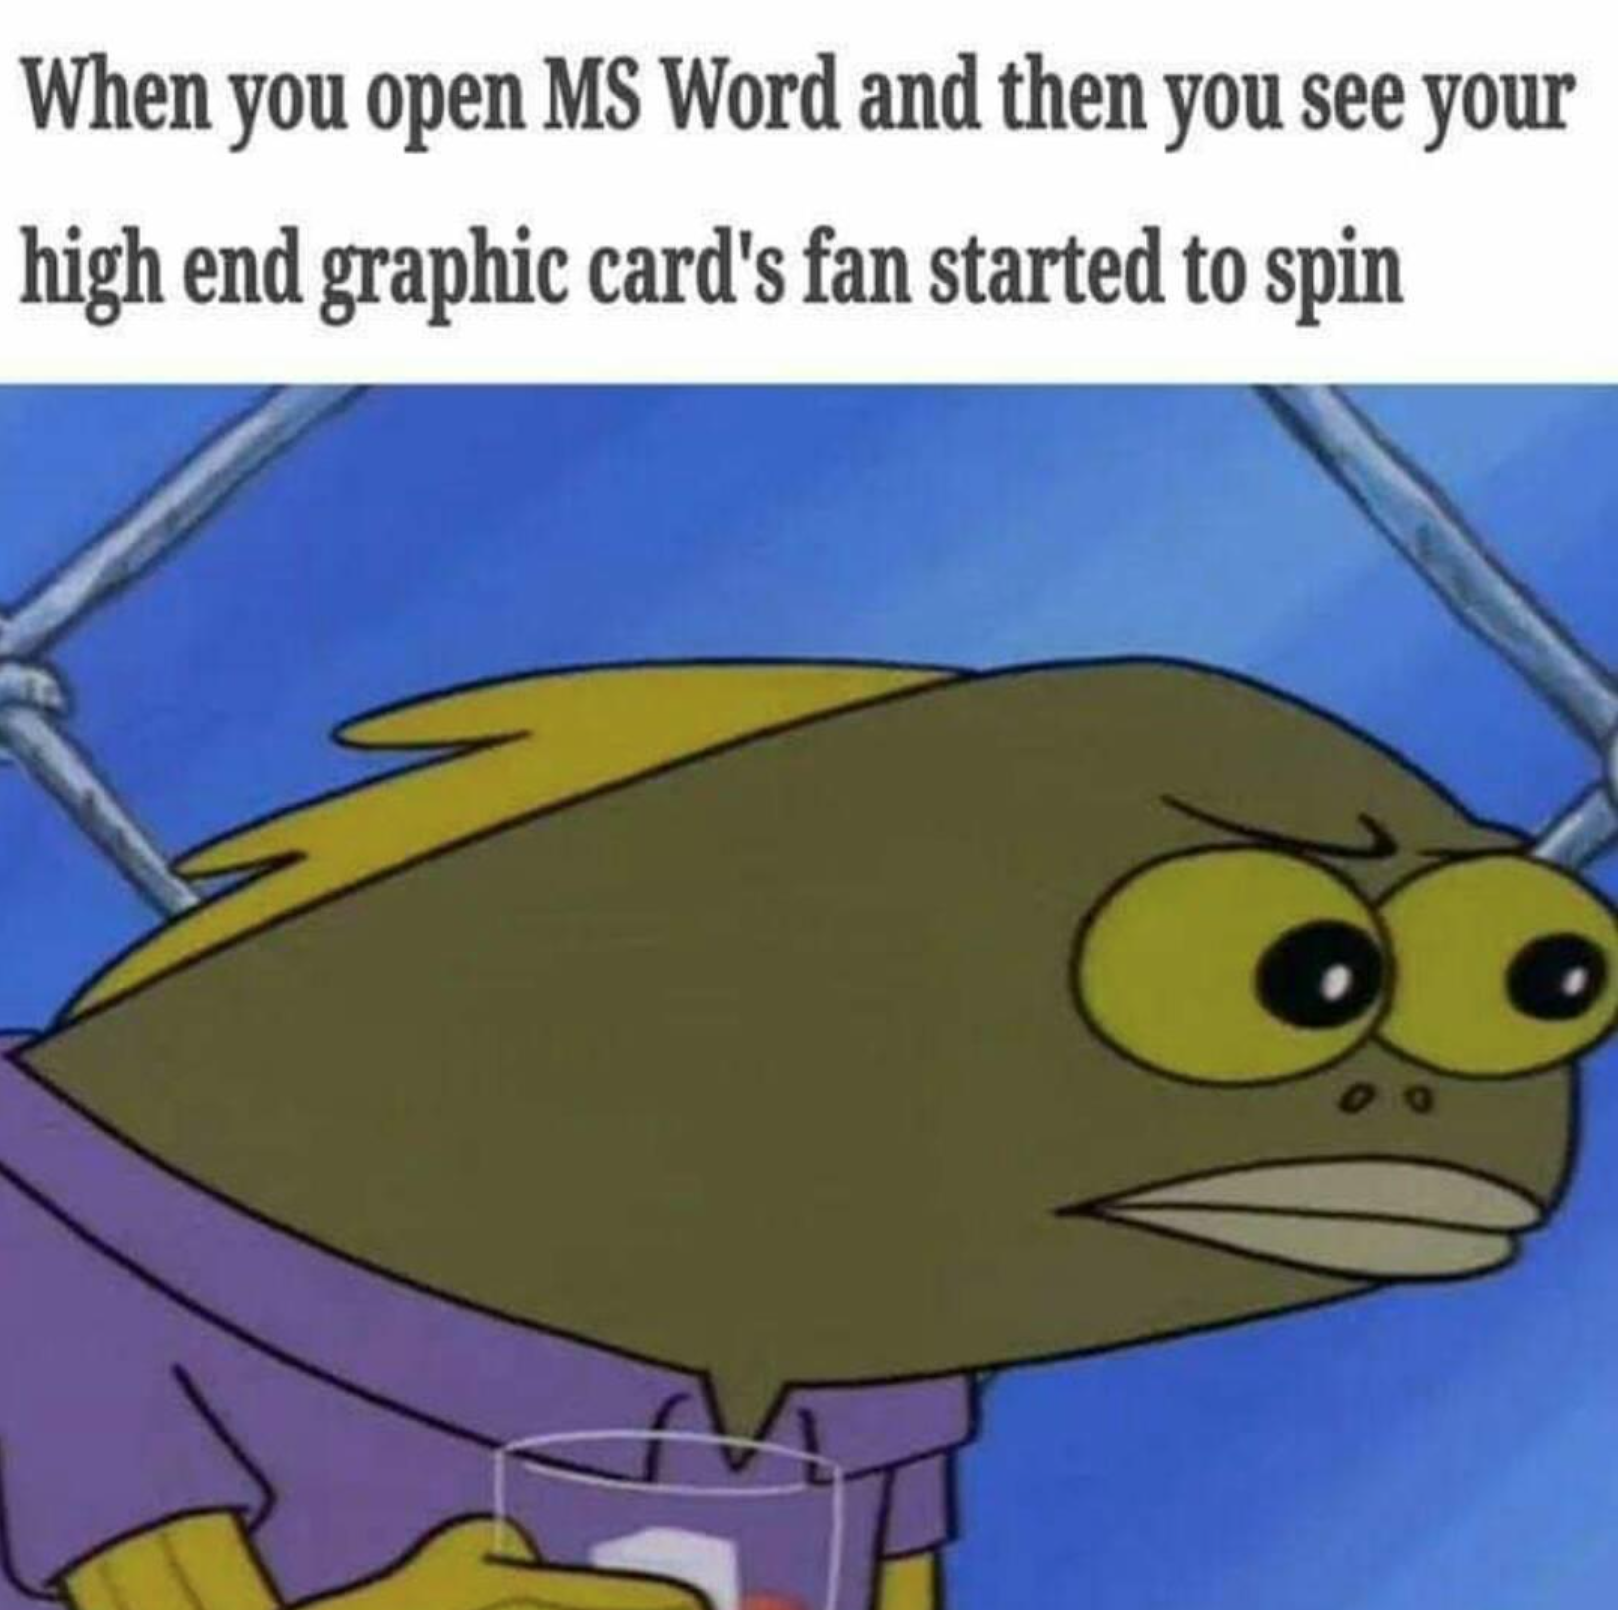 love dank memes - When you open Ms Word and then you see your high end graphic card's fan started to spin